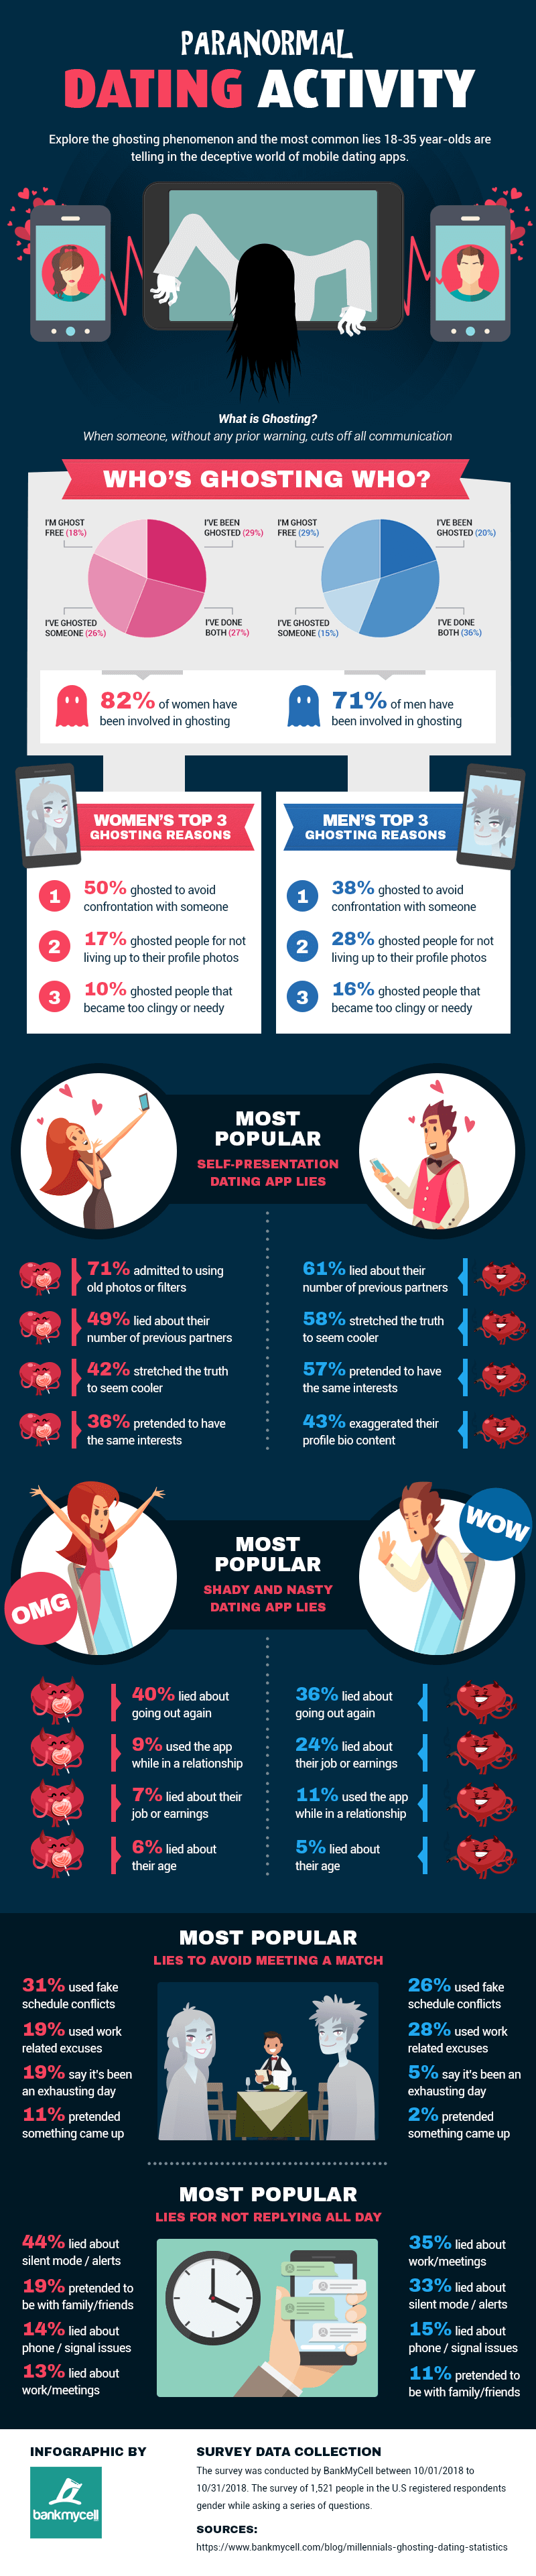 bankmycell ghosting dating app infographic